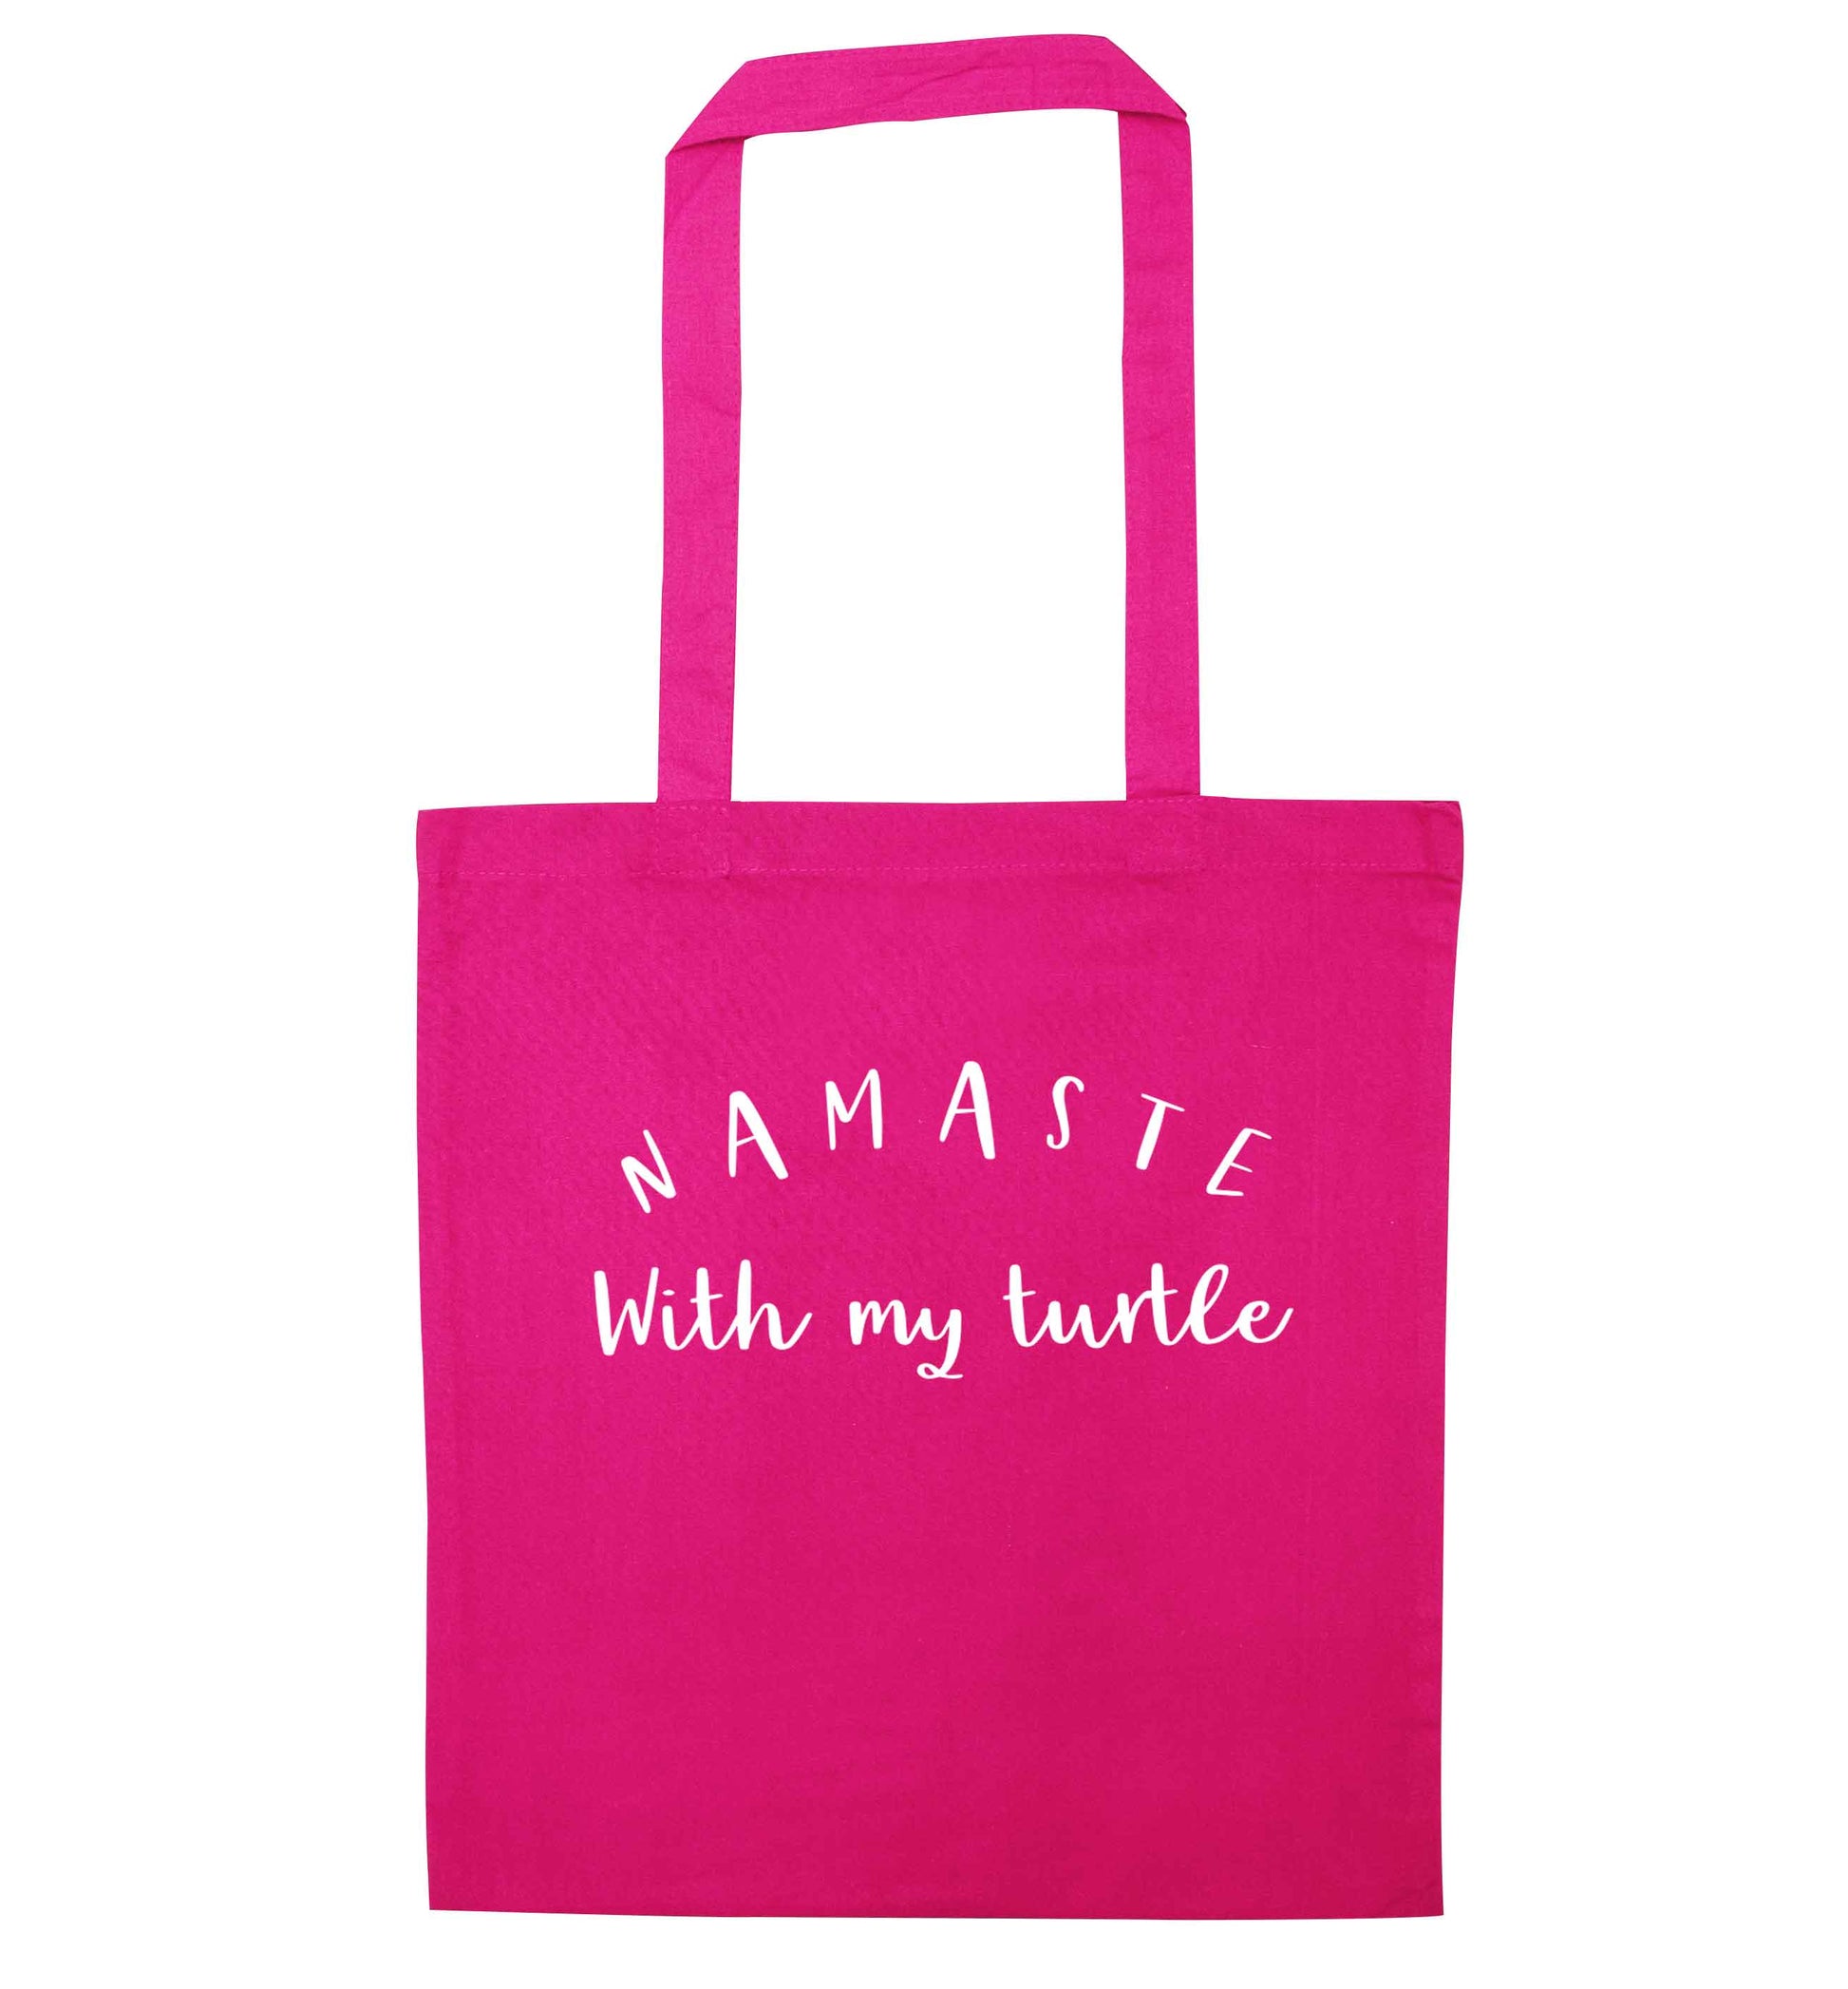 Namaste with my turtle pink tote bag